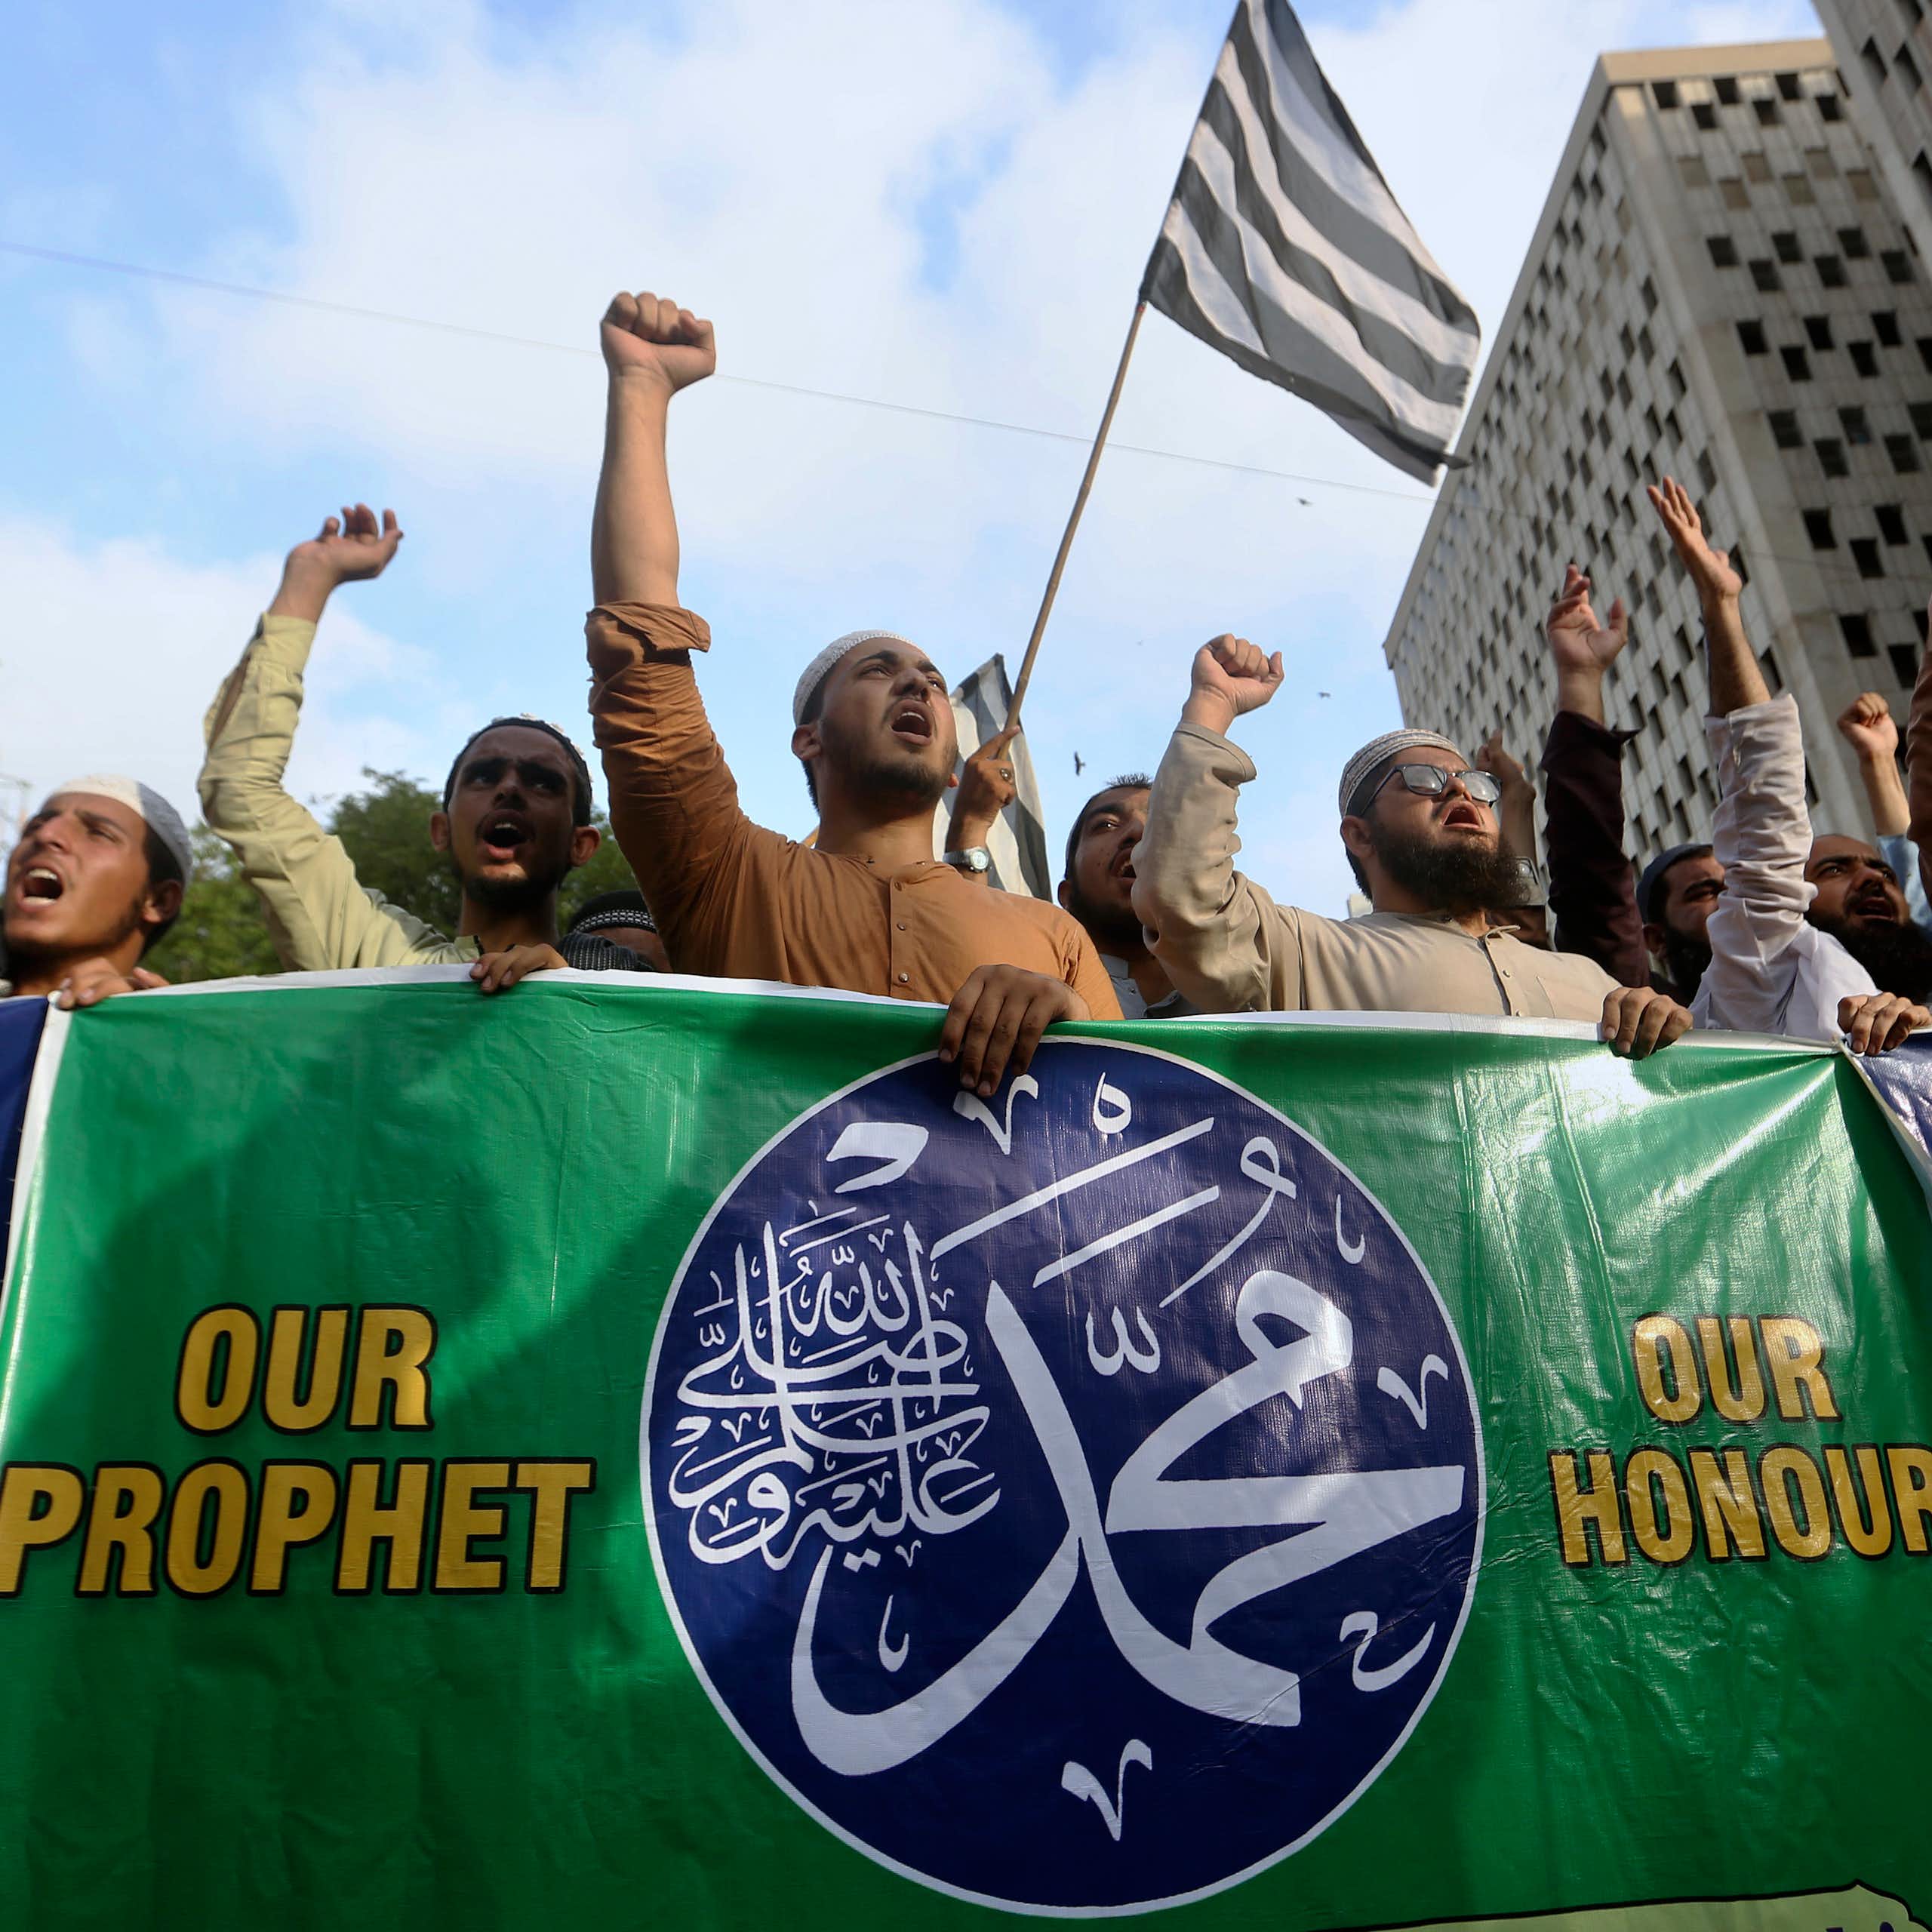 A group of people at a protest carry a banner reading: our prophet, our honour